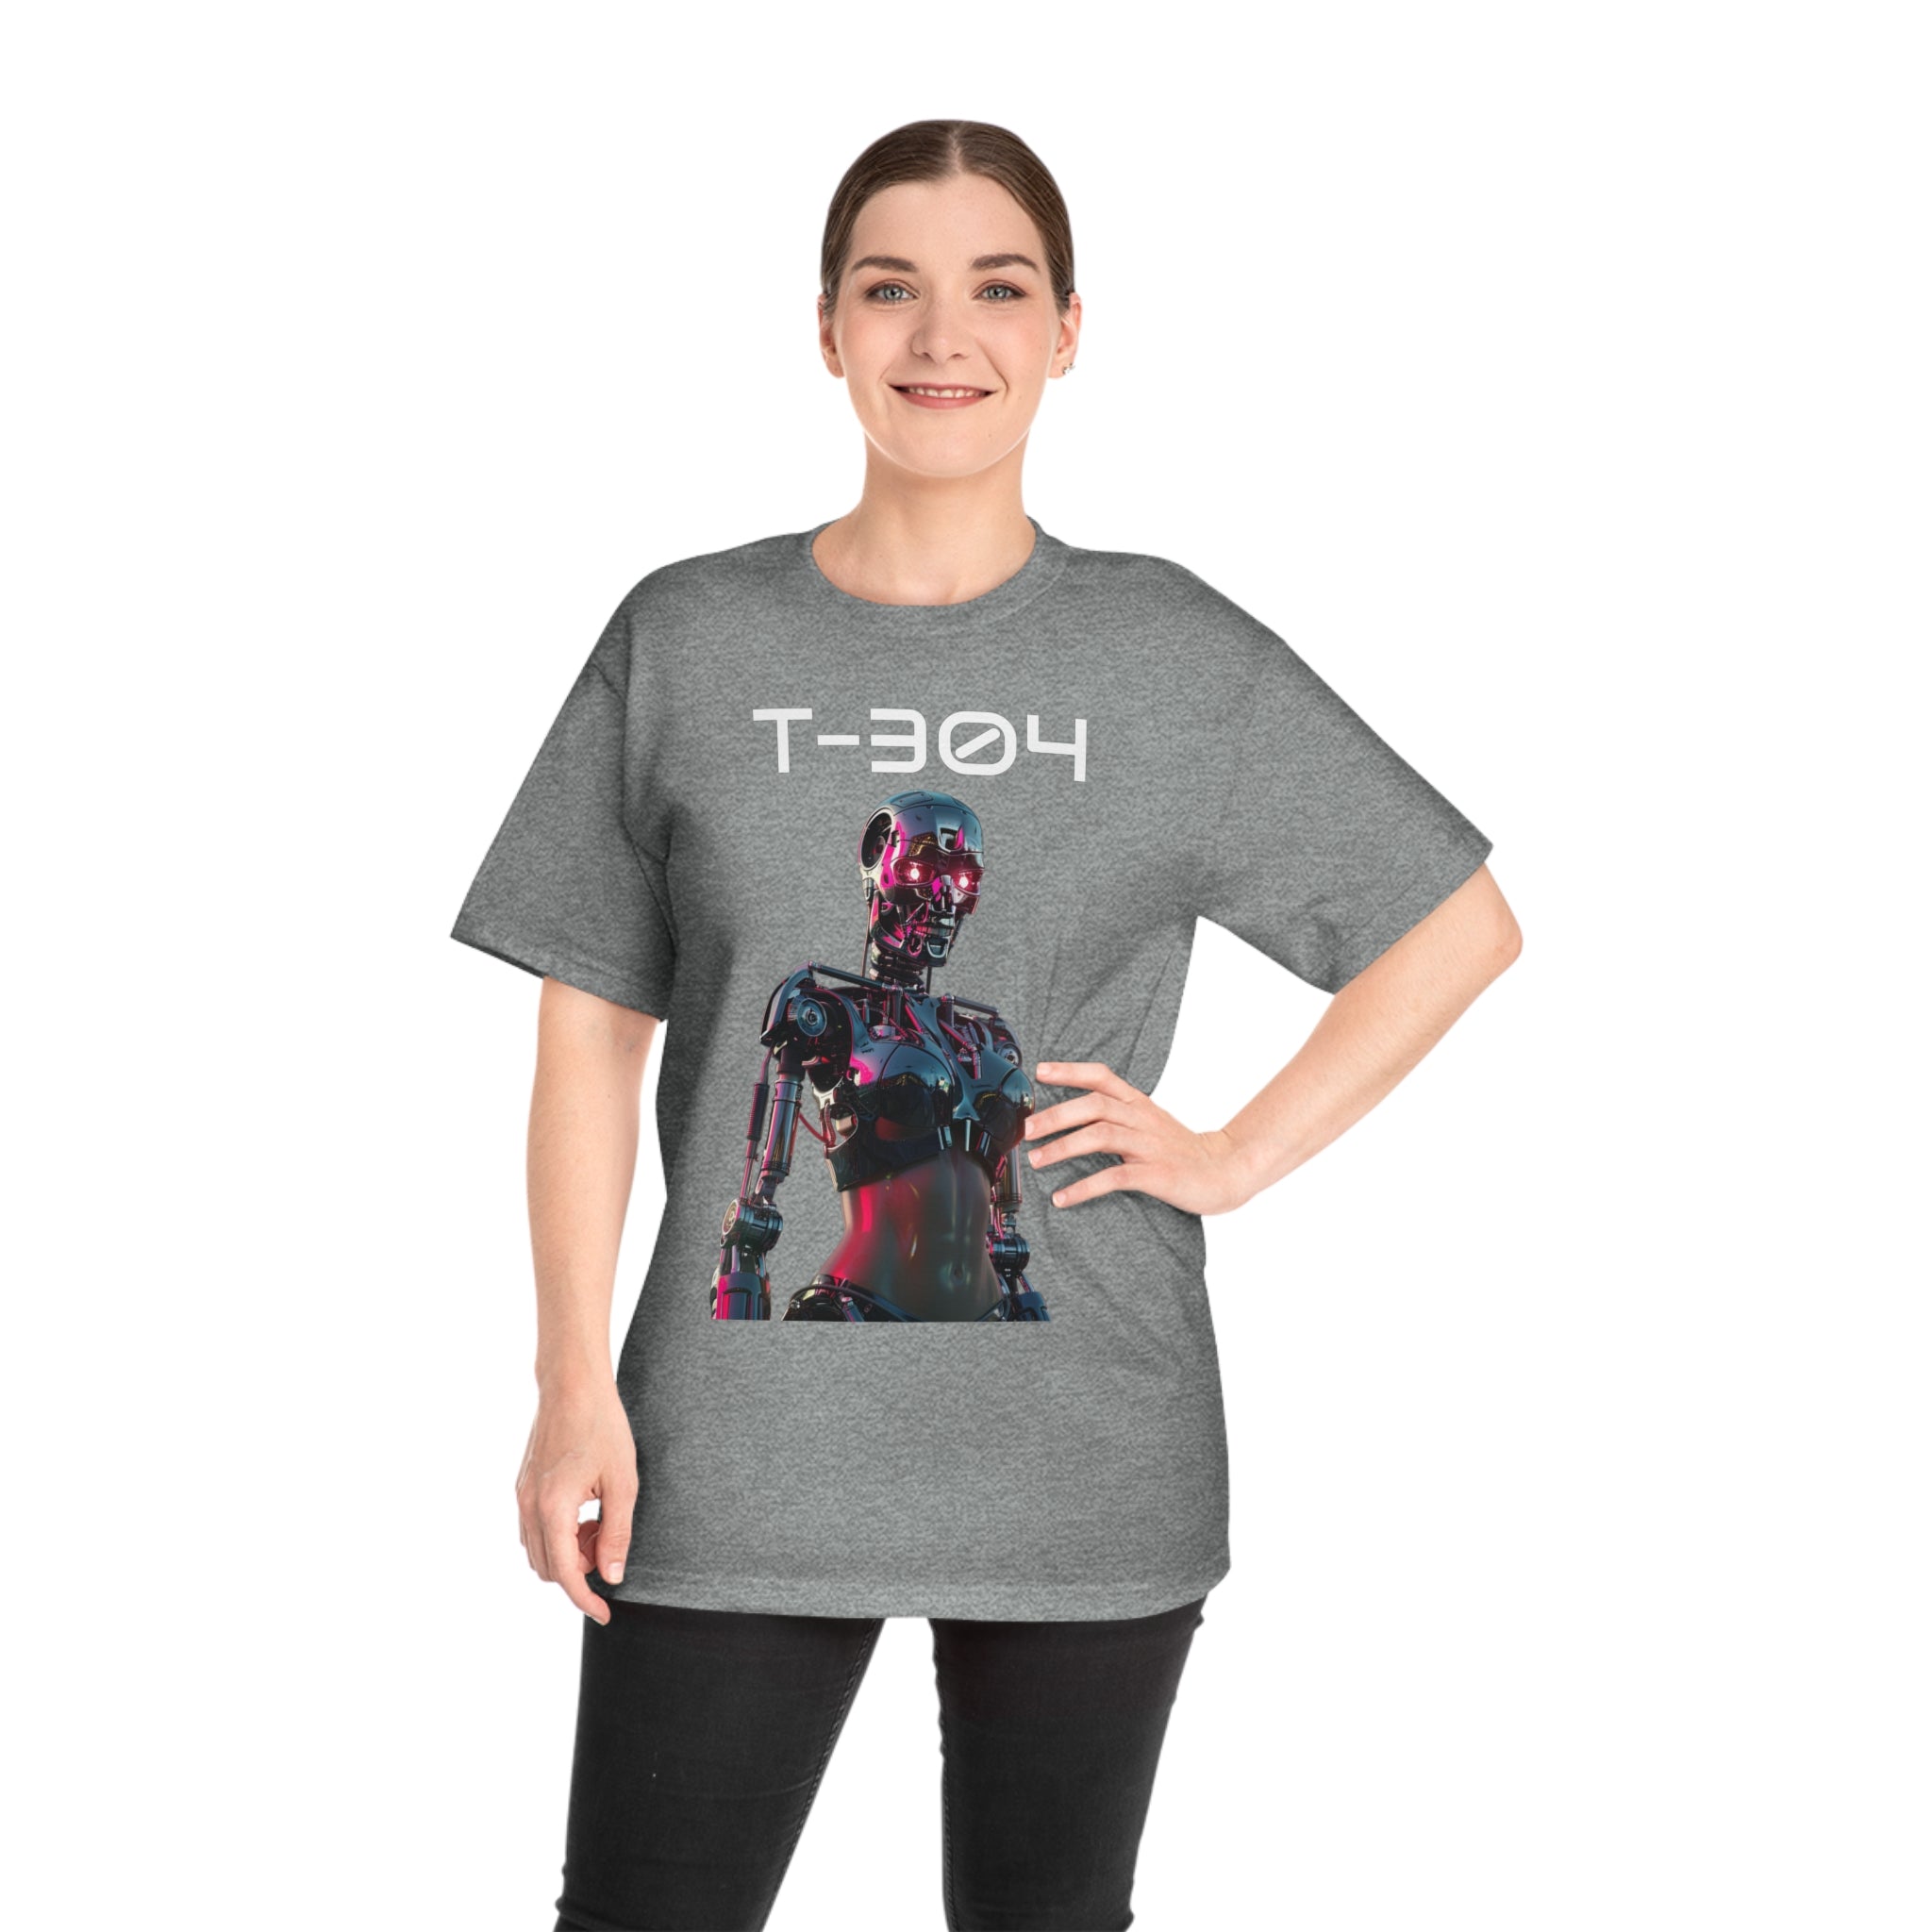 The image presents a sleek, unisex Hammer™ t-shirt, adorned with the T-304 Glam Gal in a vibrant, retro-futuristic design. The tee showcases a high-quality print that captures the essence of Terminator-inspired glam, set against the backdrop of the tee's premium fabric, signaling a perfect blend of comfort and iconic style.